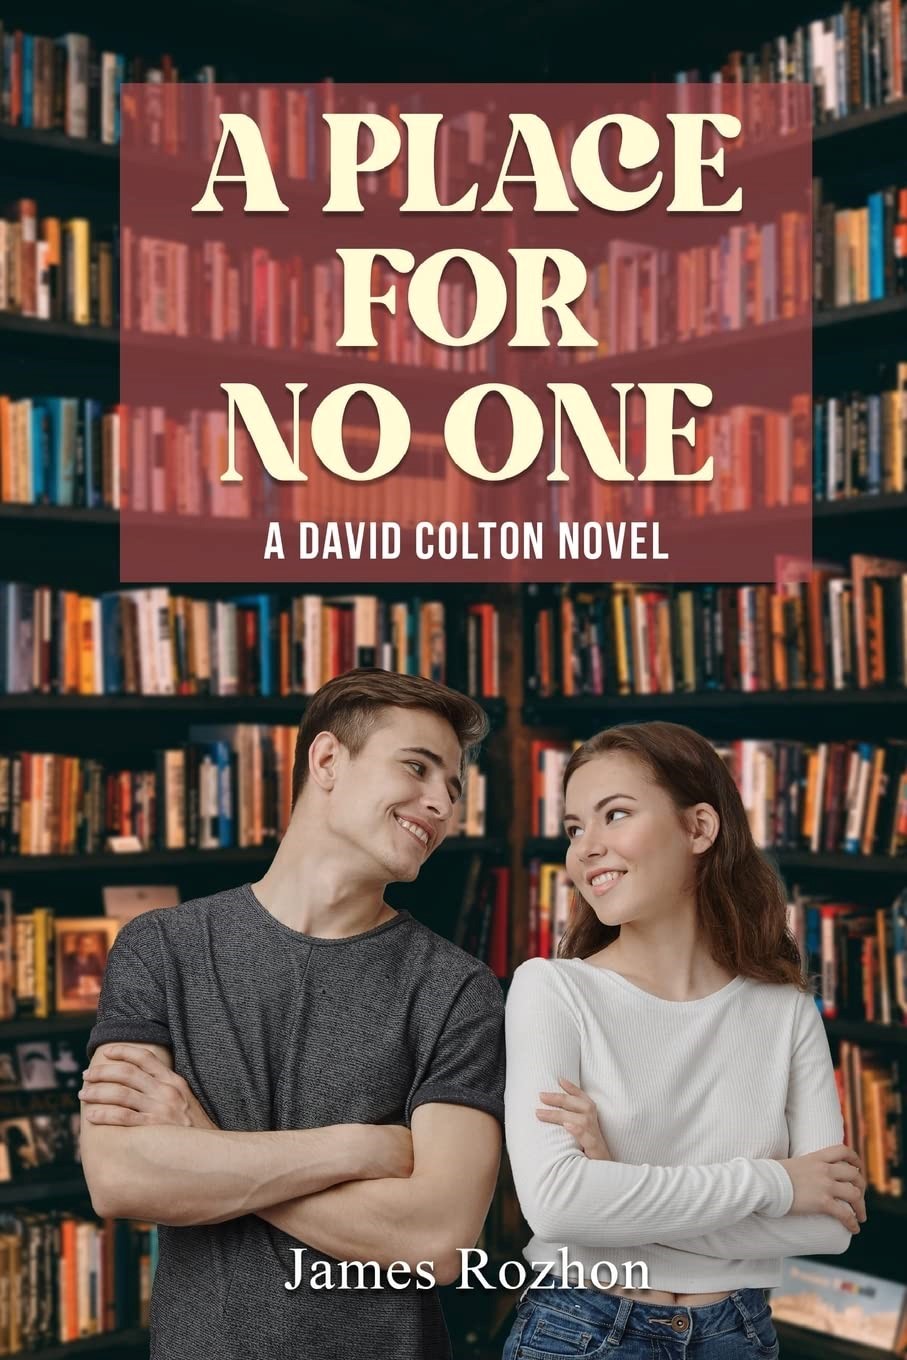 "A Place For No One: A David Colton Novel" - A Gripping Tale of Loss, Discovery, and Personal Transformation